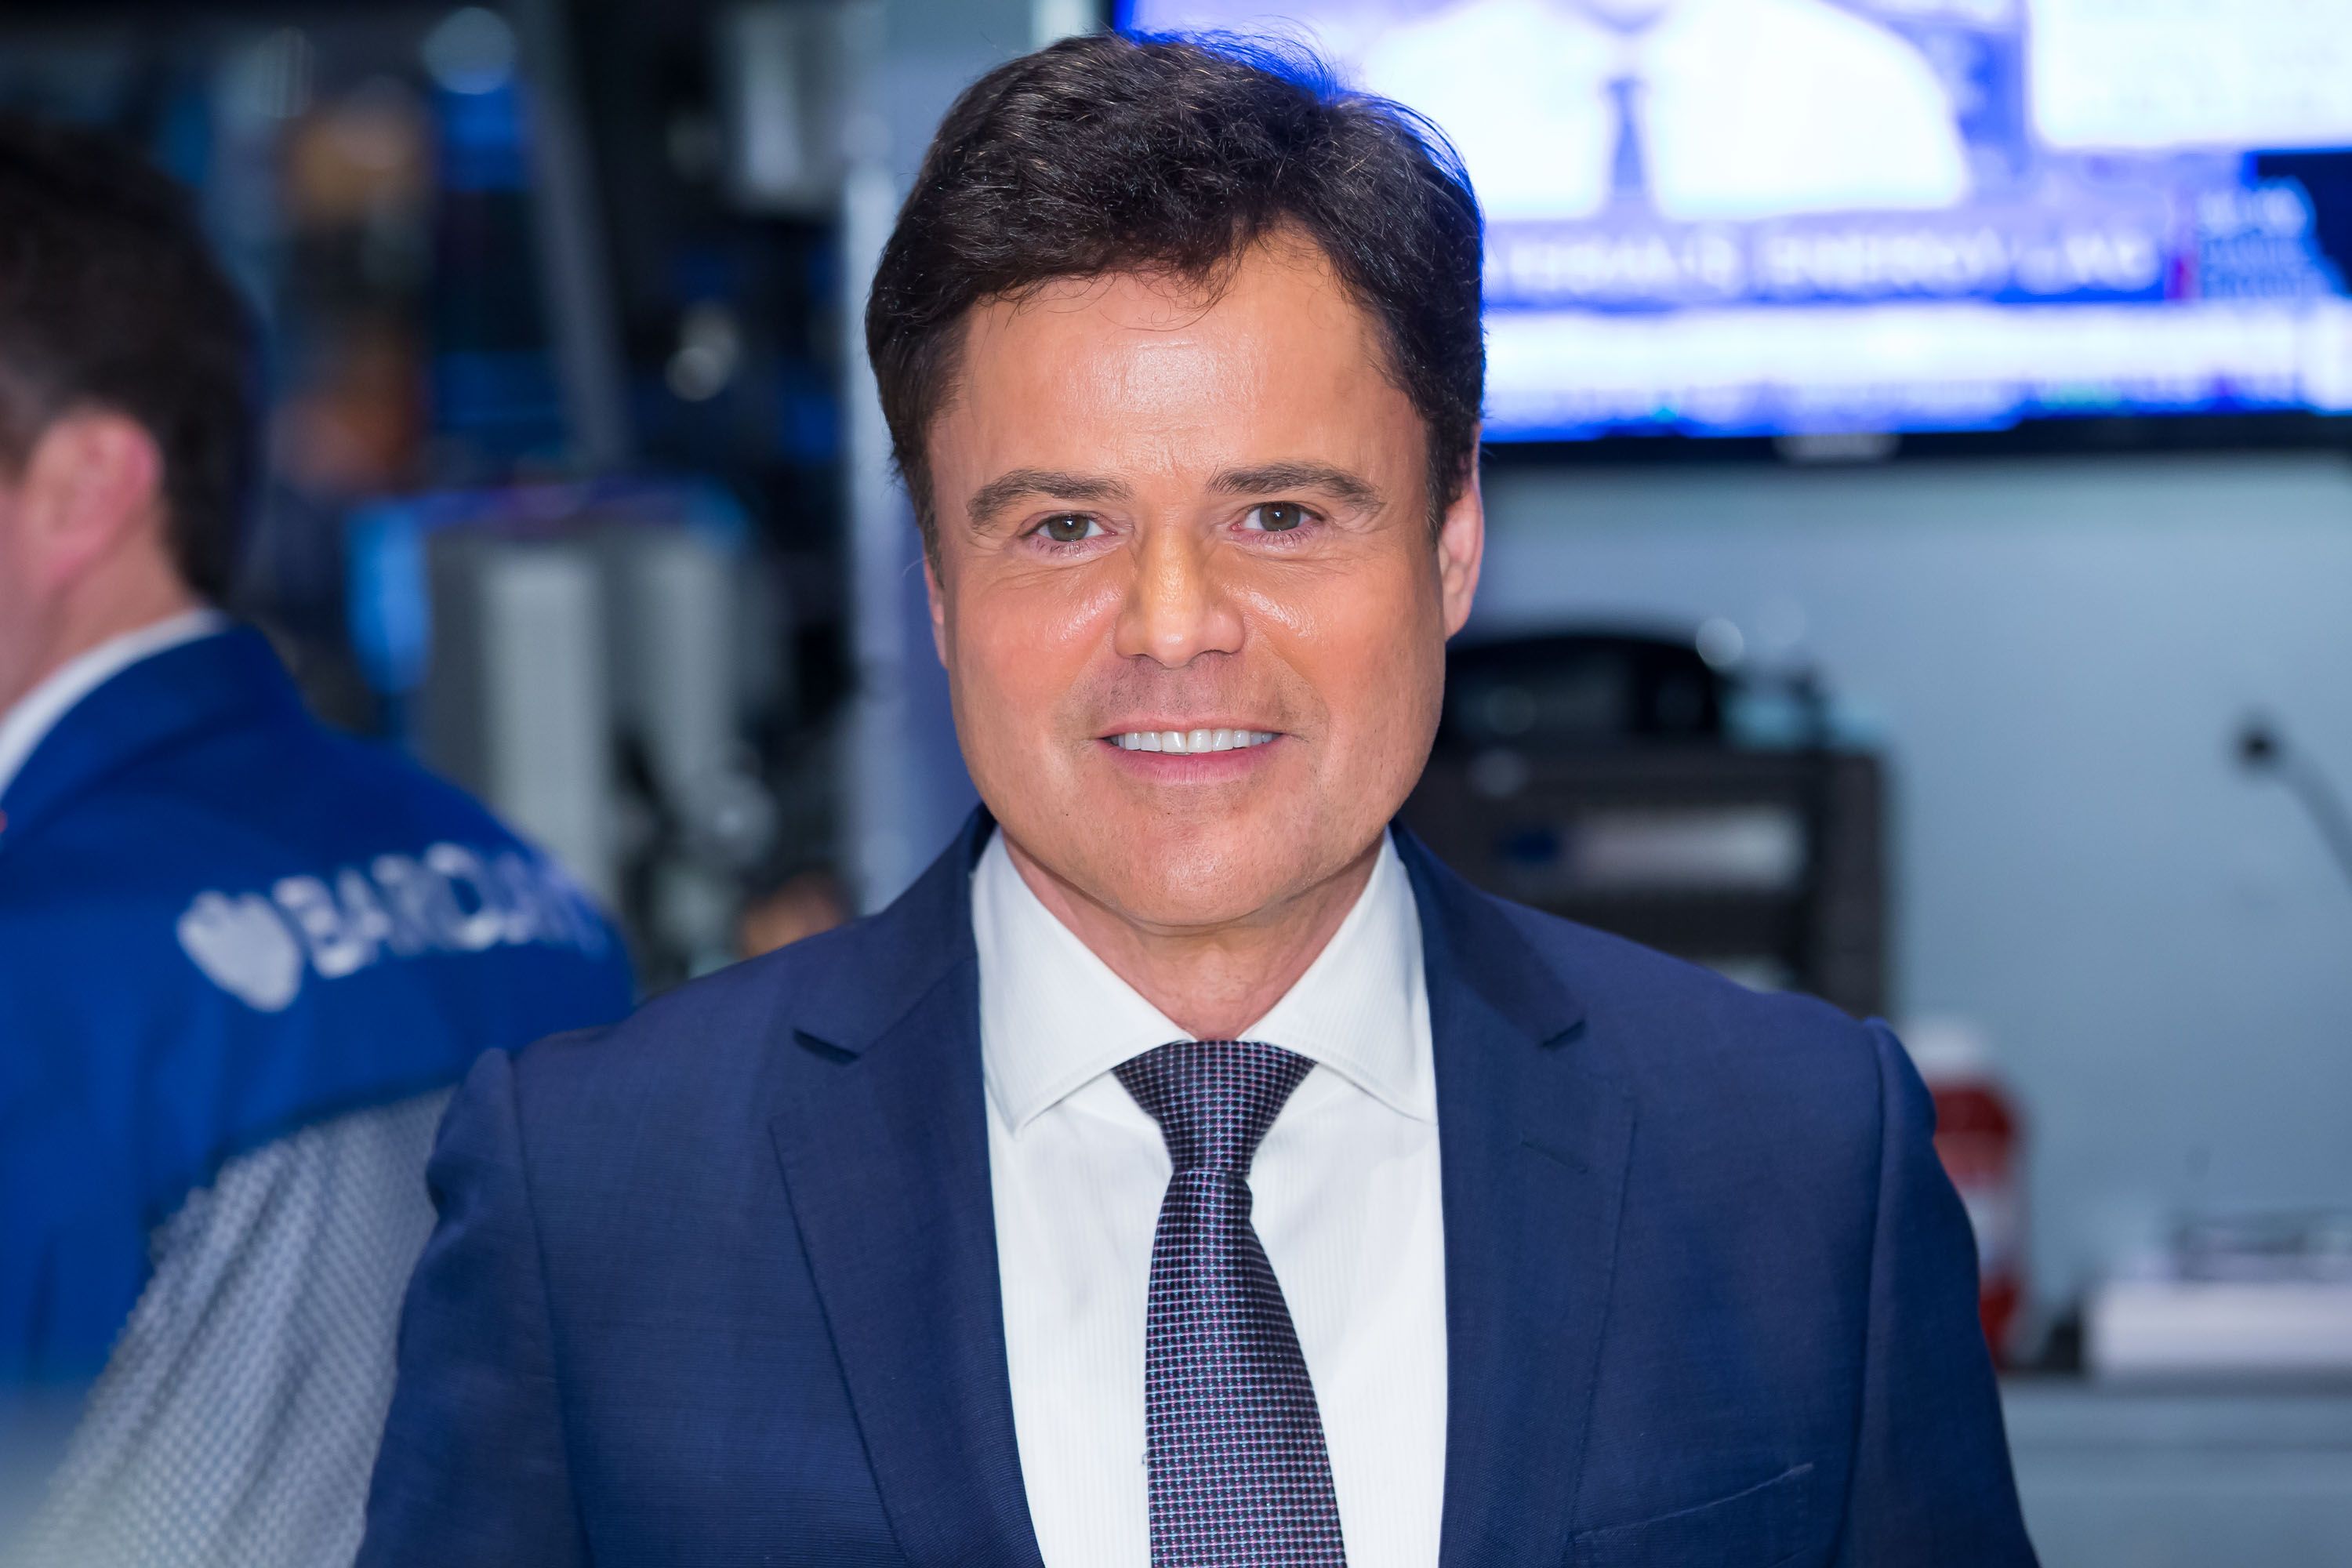 Donny Osmond rings the Closing Bell at New York Stock Exchange on January 13, 2015 in New York City | Photo: Ben Hider/Getty Images